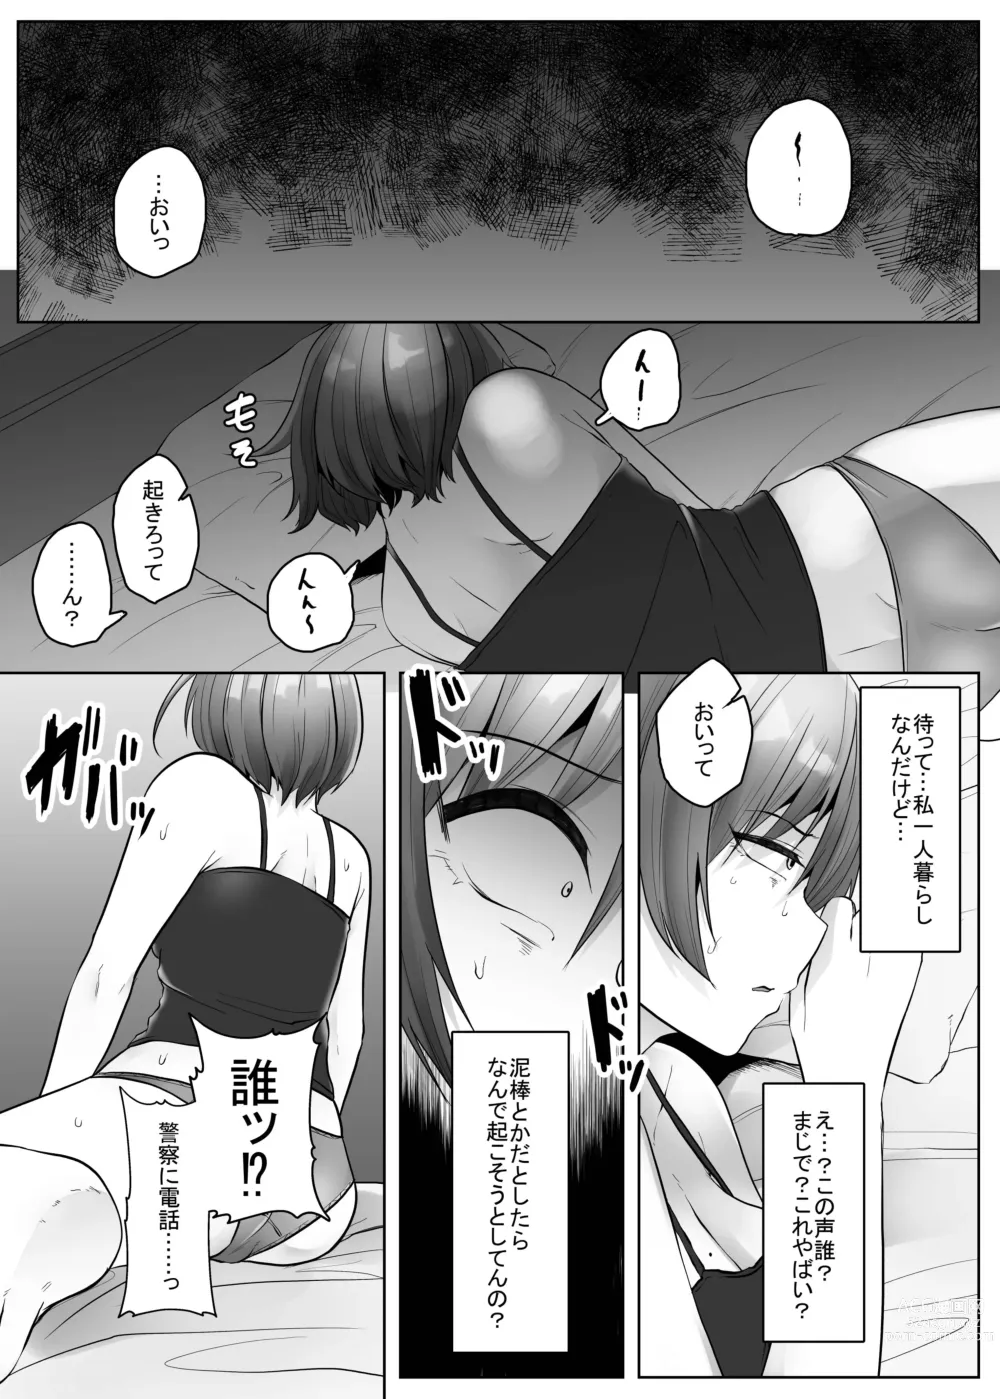 Page 7 of doujinshi Sexy~Vegetables